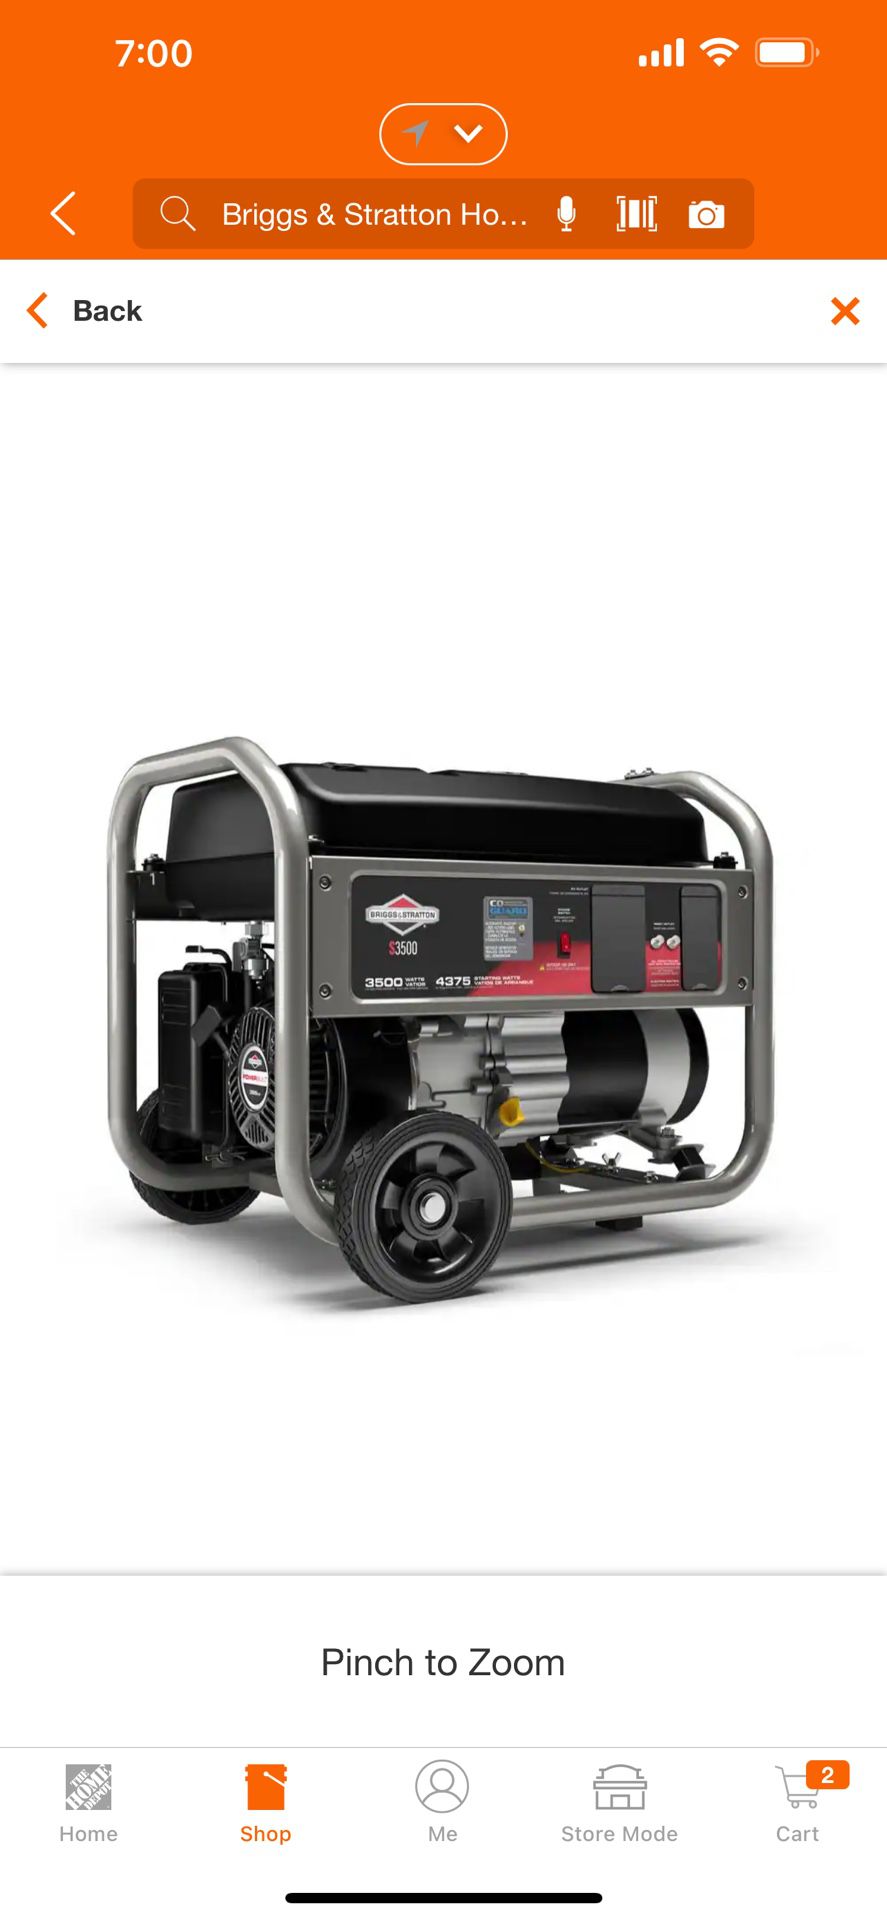 Briggs & Stratton  Home 3500-Watt Recoil Start Gasoline Powered Portable Generator with B&S OHV Engine Featuring CO Guard